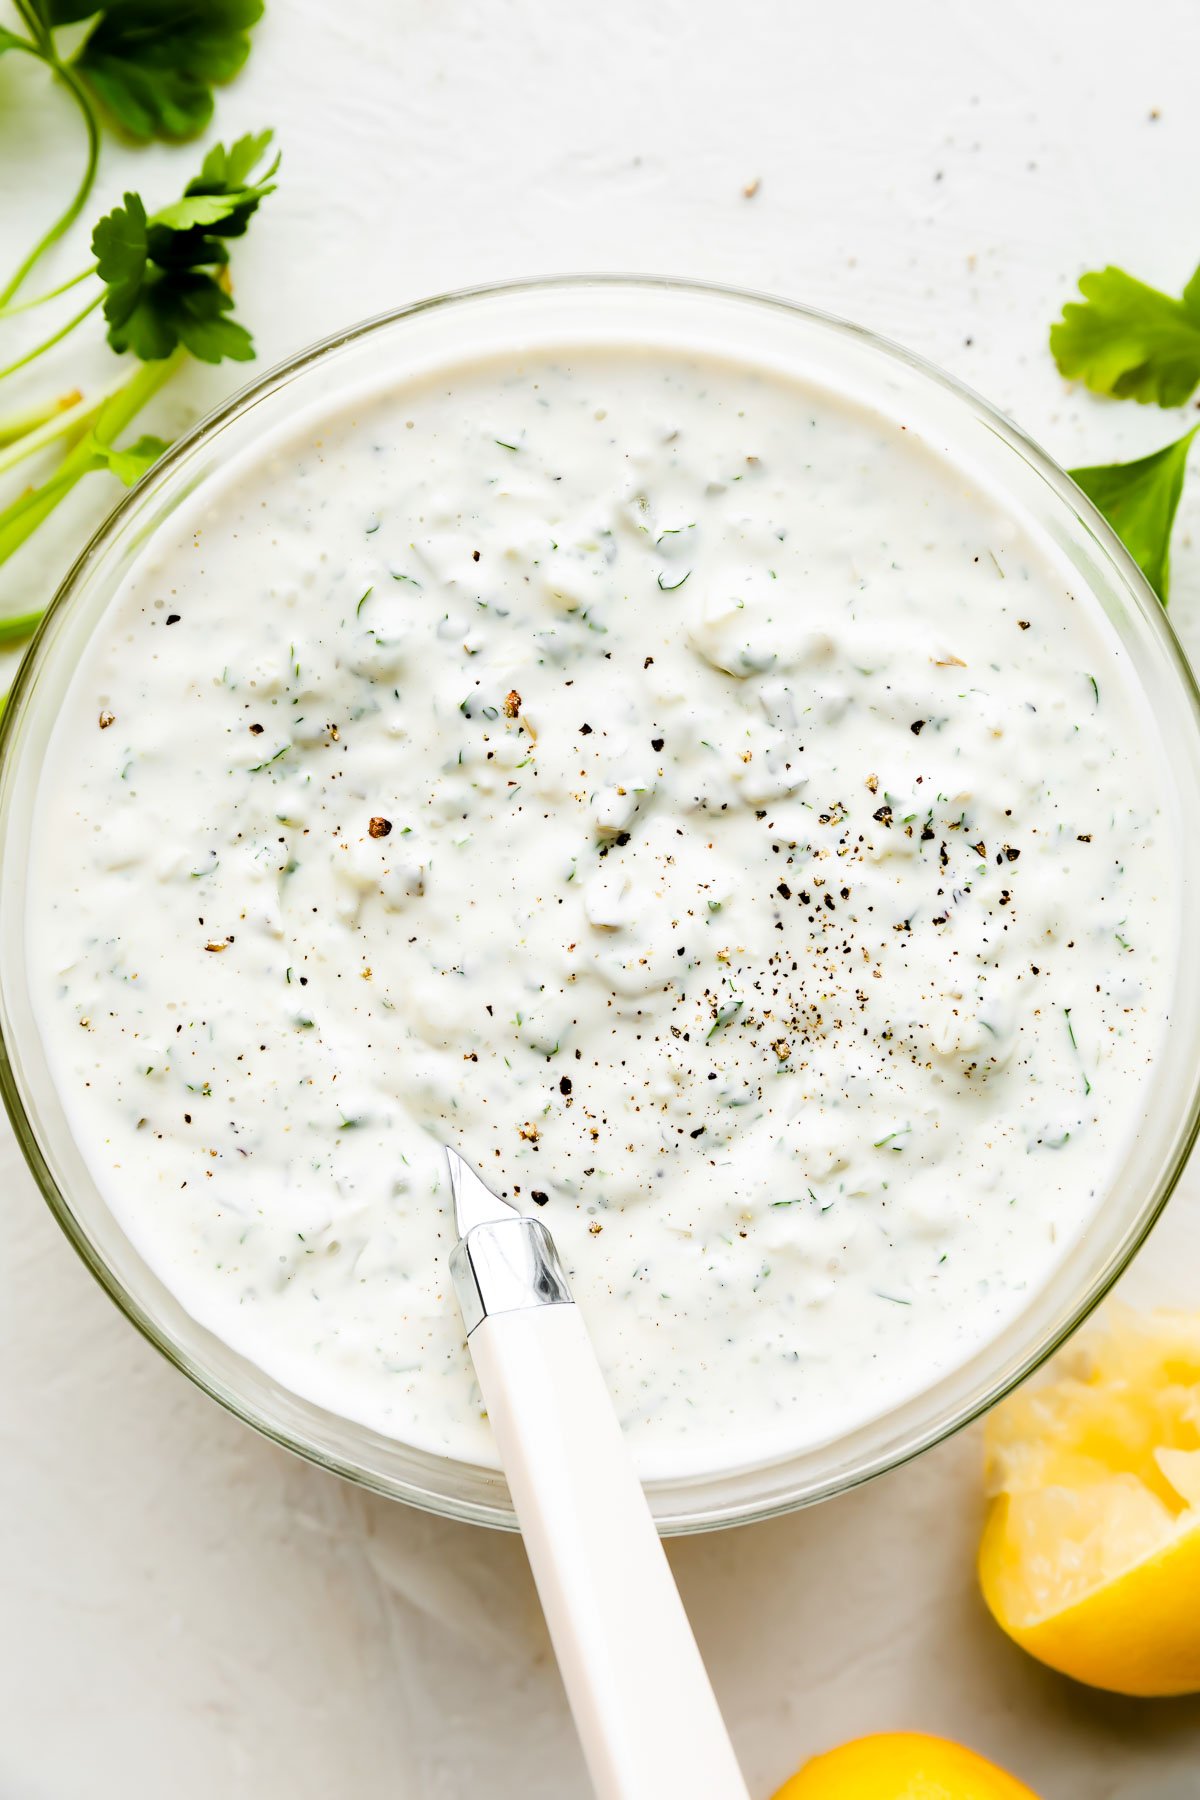 Mixed tartar sauce fills a small glass mixing bowl. A spoon with a white handle rests inside. The bowl sits atop a creamy white textured surface surrounded by fresh parsley and spent lemon halves.